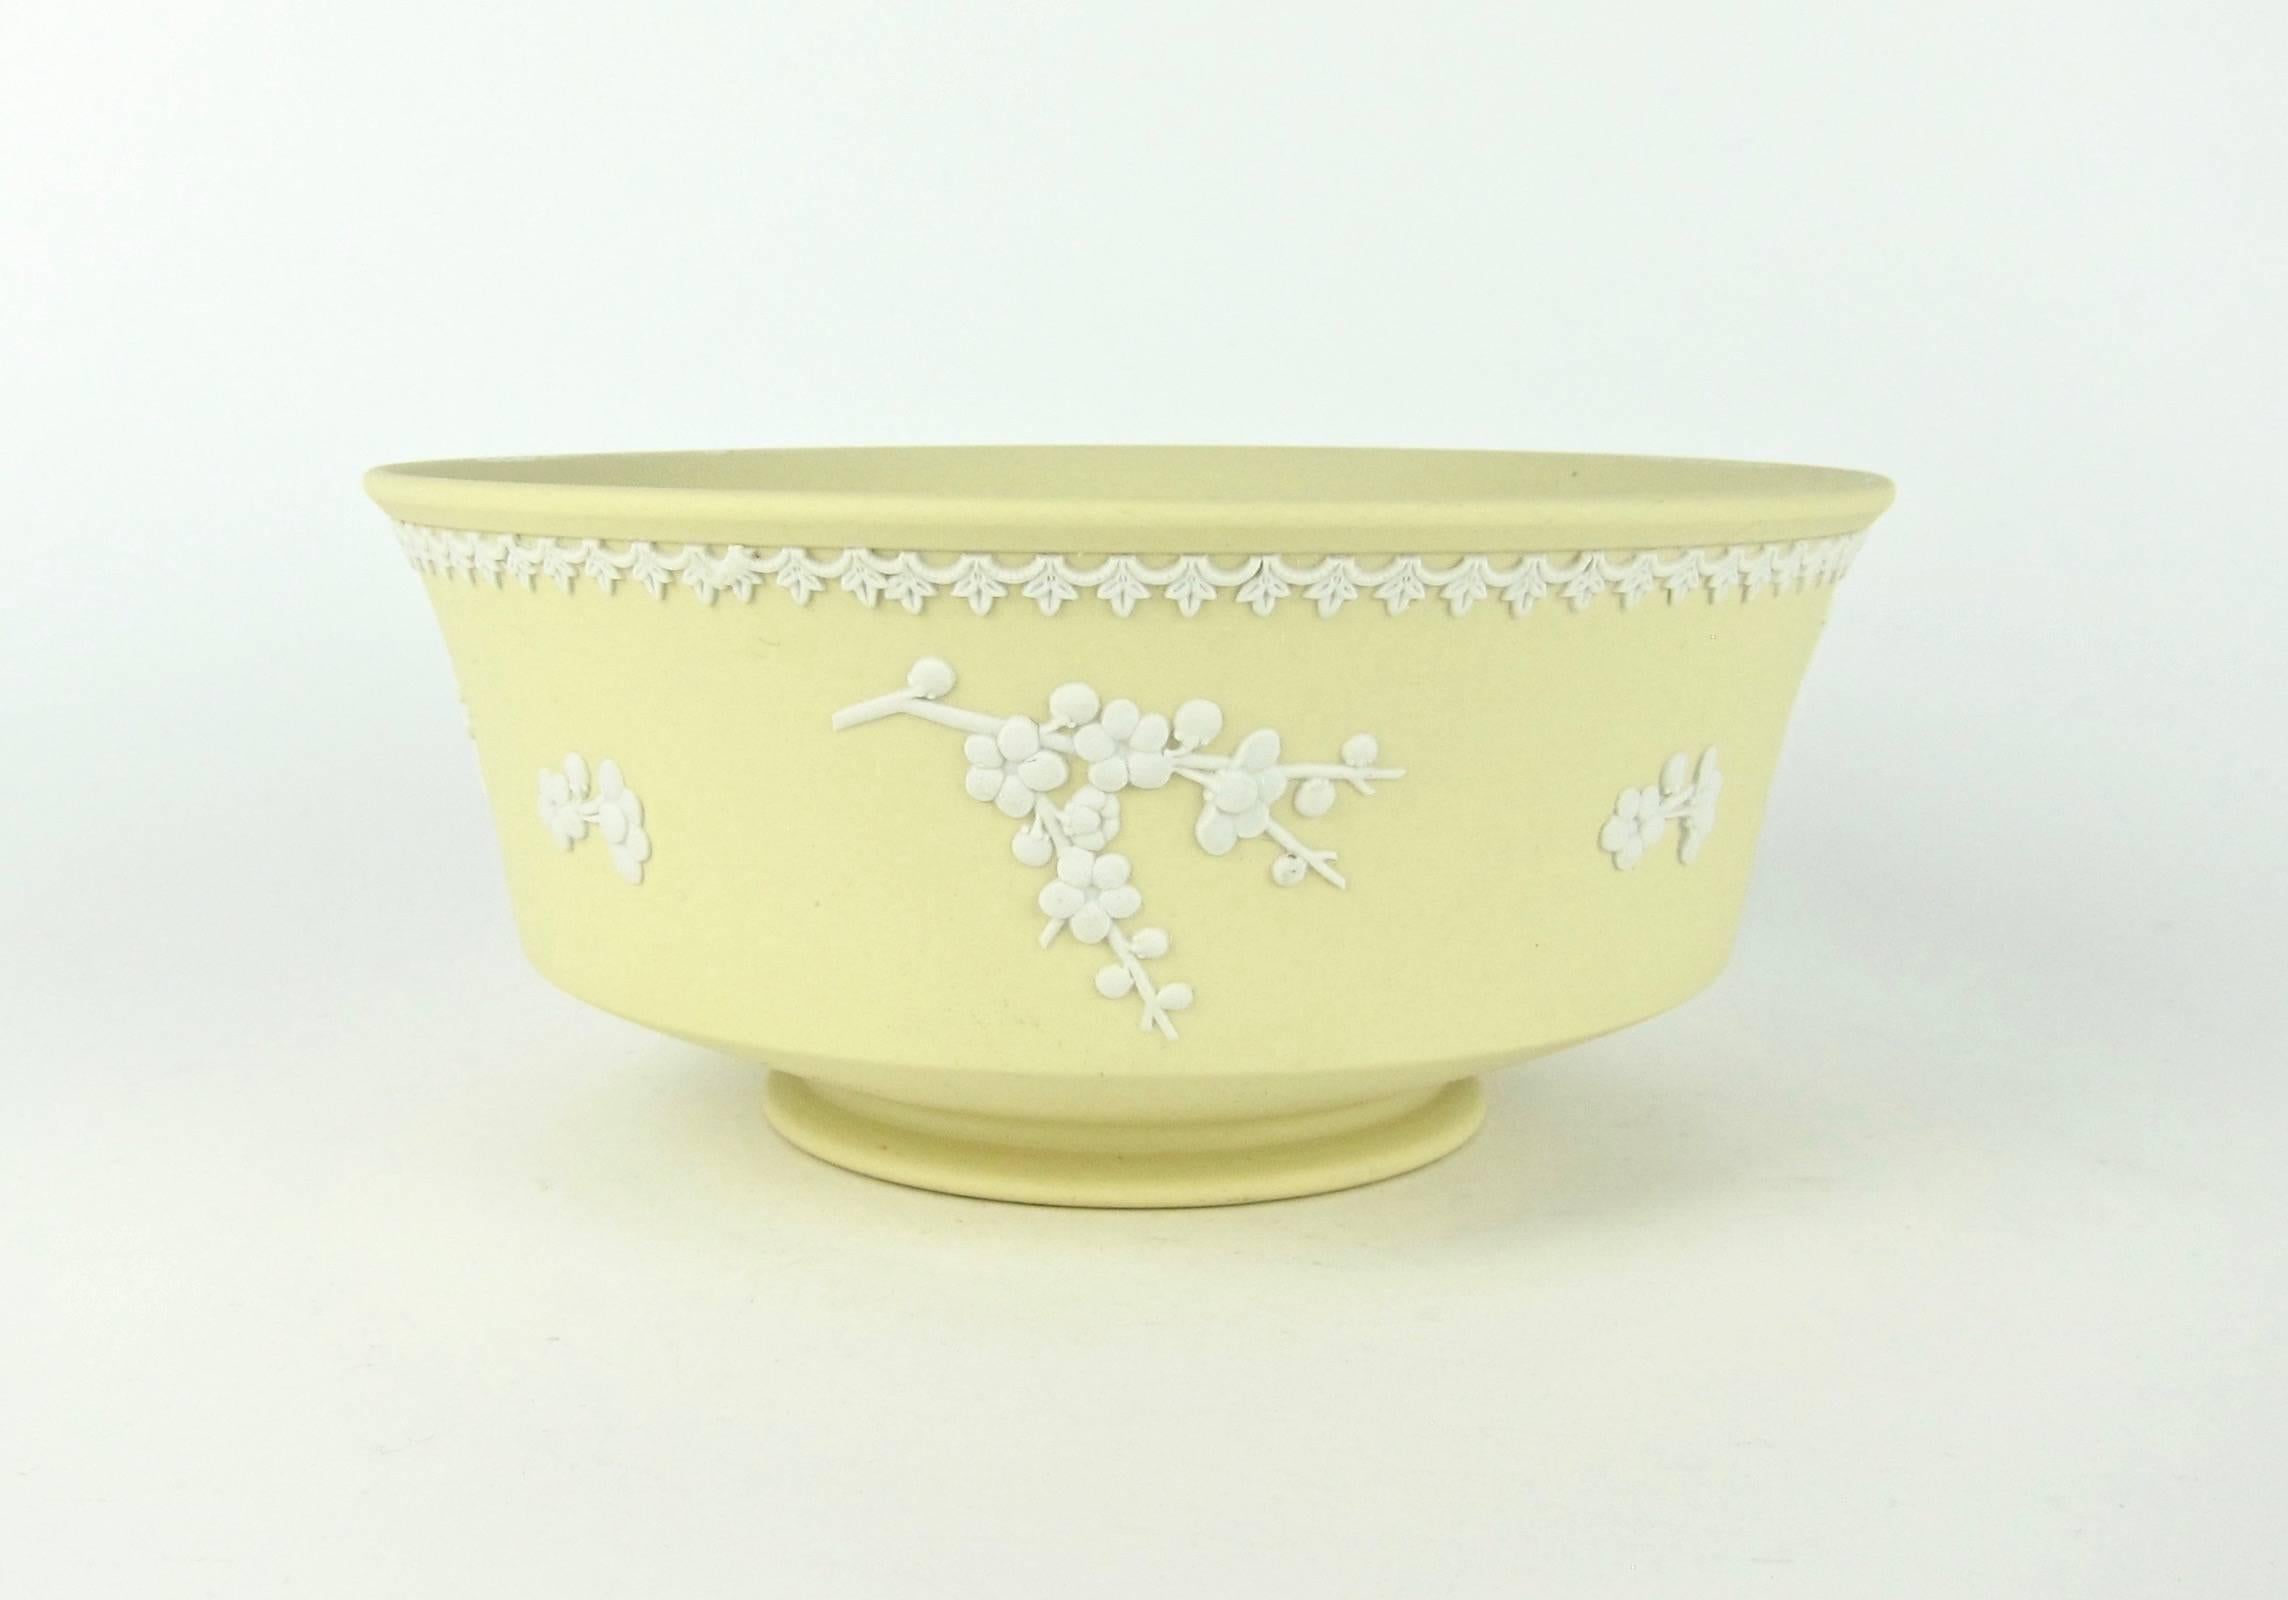 A vintage English Wedgwood footed bowl in solid Primrose yellow jasper decorated with white bas-relief in the Prunus pattern. Made in England in 1976 and illustrated on page 172 of Wedgwood Ceramics, by Daniel J. Keefe III, 2005. 

The